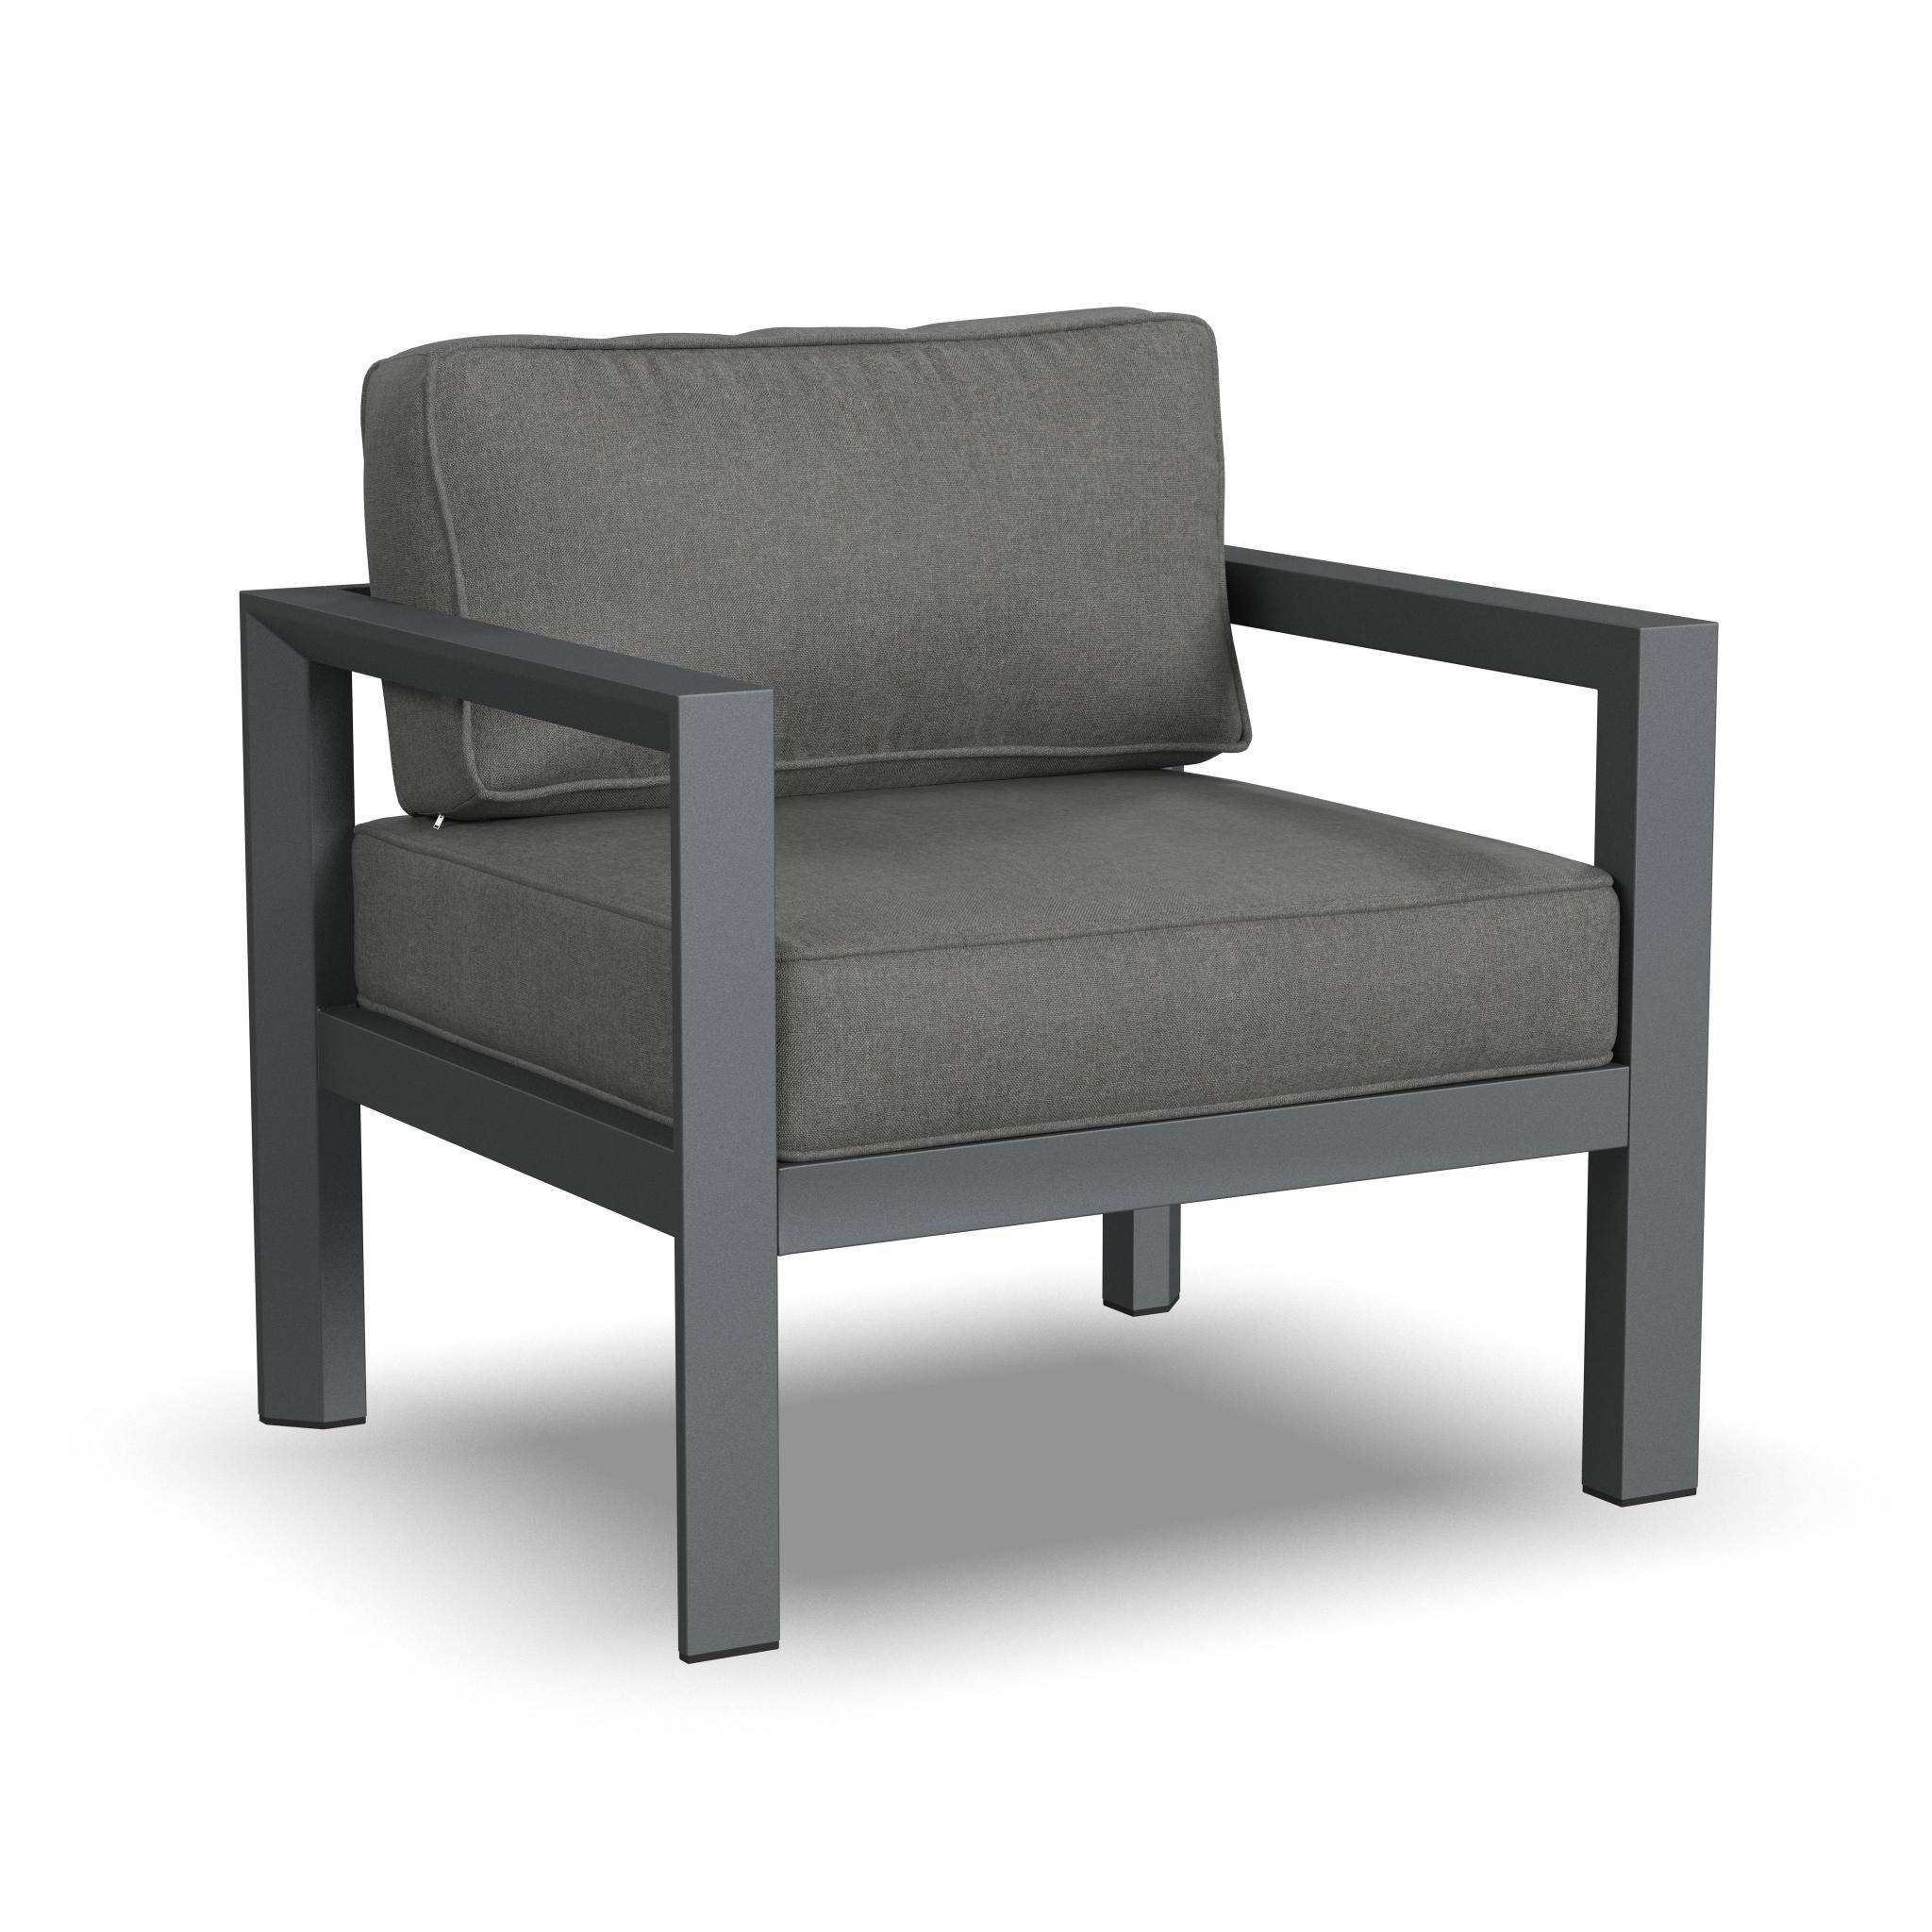 Homestyles Grayton Aluminum Outdoor Aluminum Lounge Chair in Gray - image 1 of 10